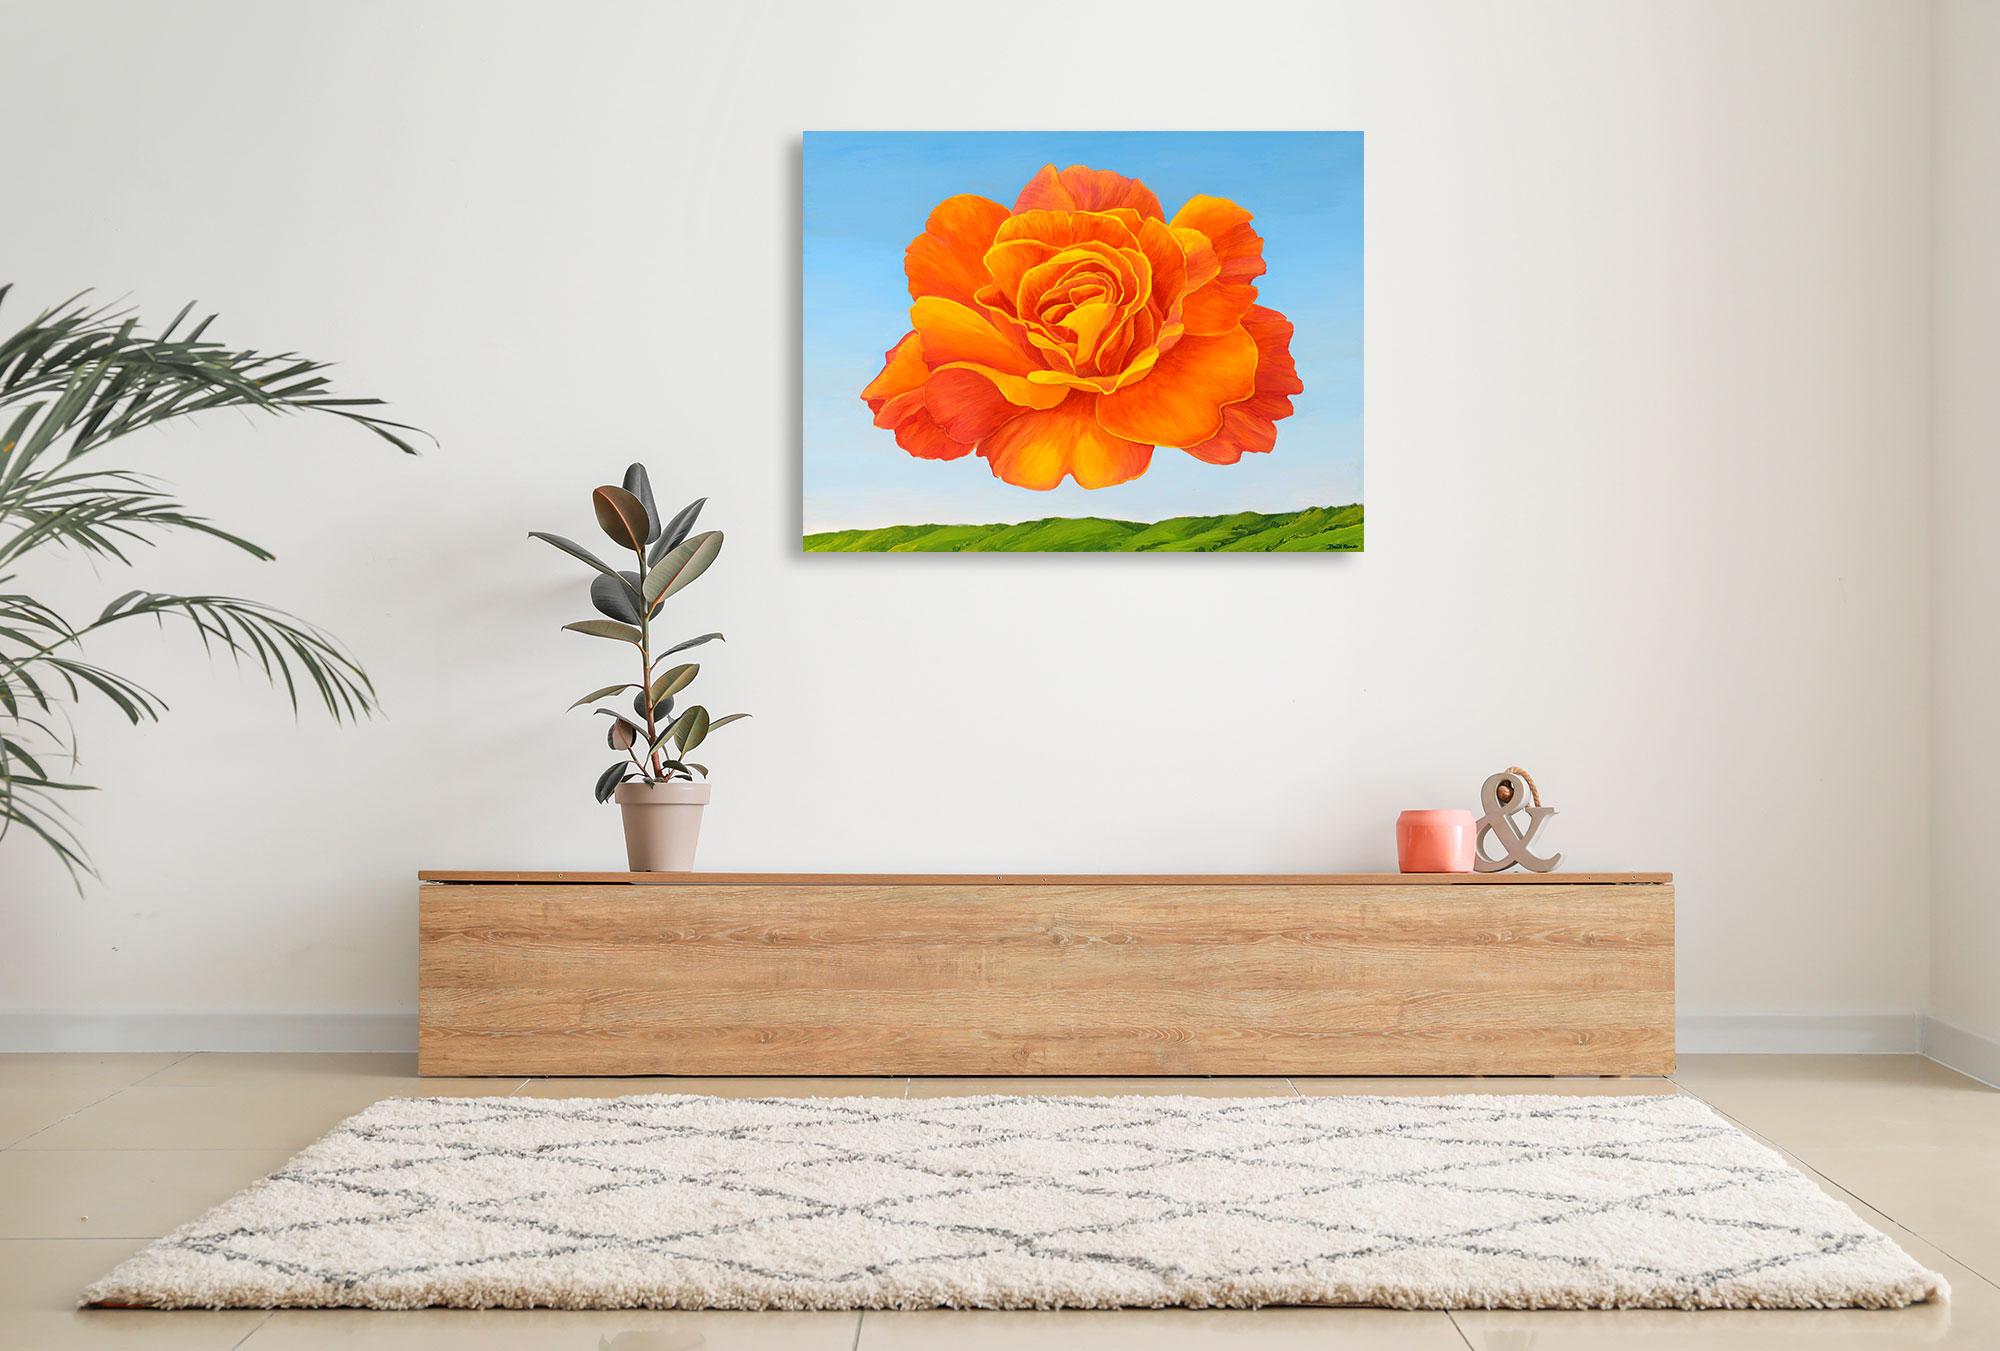 Floating Rose - Acrylic On Canvas - Landscape Painting By Dante Rondo For Sale 1